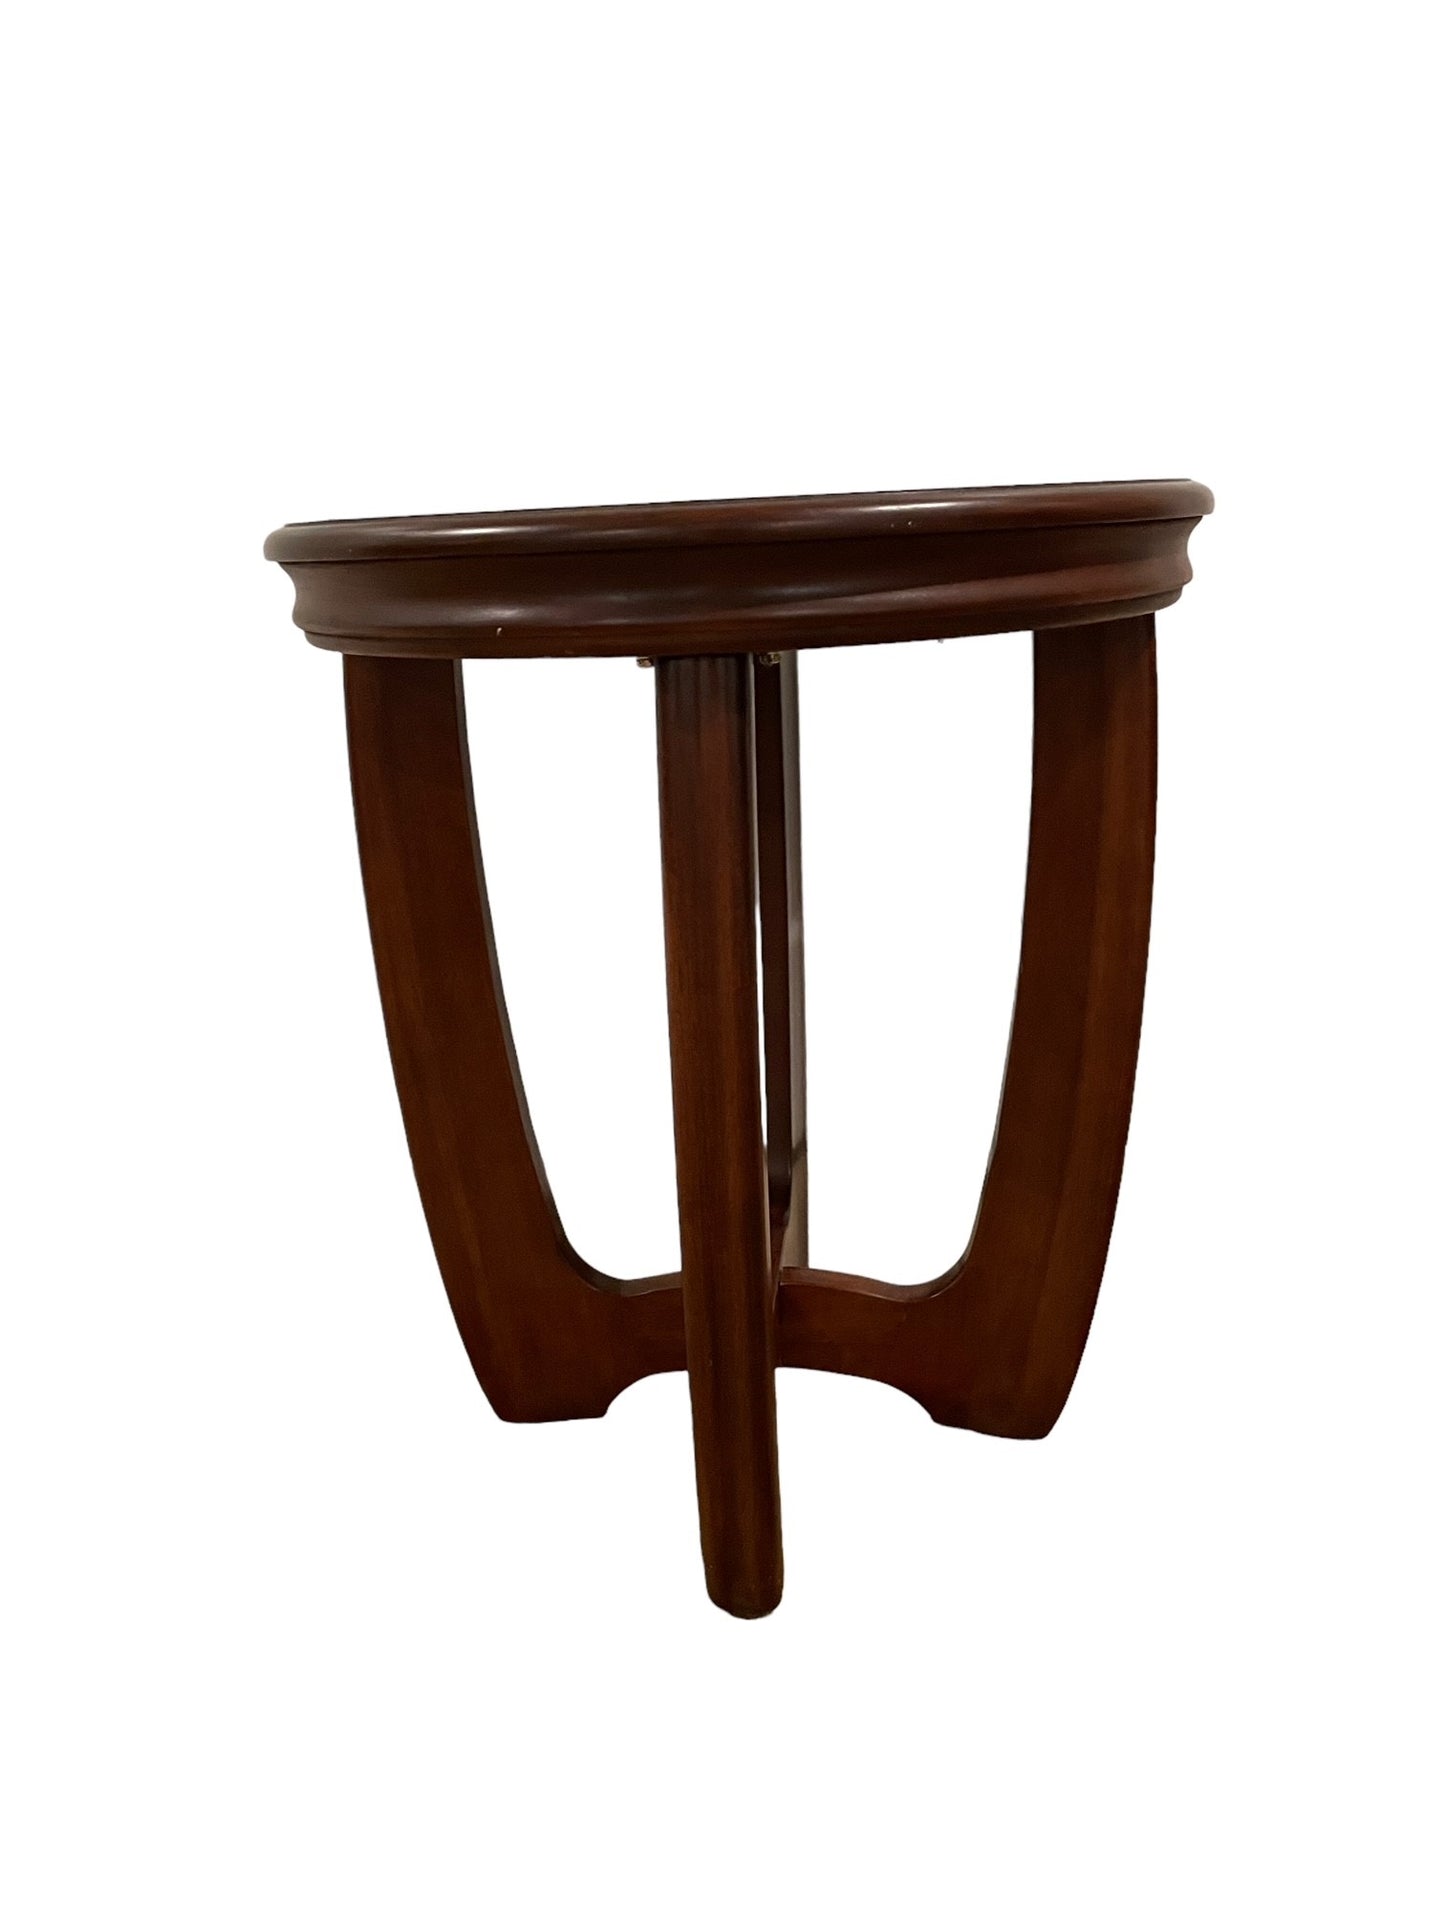 Beautiful Round Wood Bernhardt Accent Side End Table LY200-4